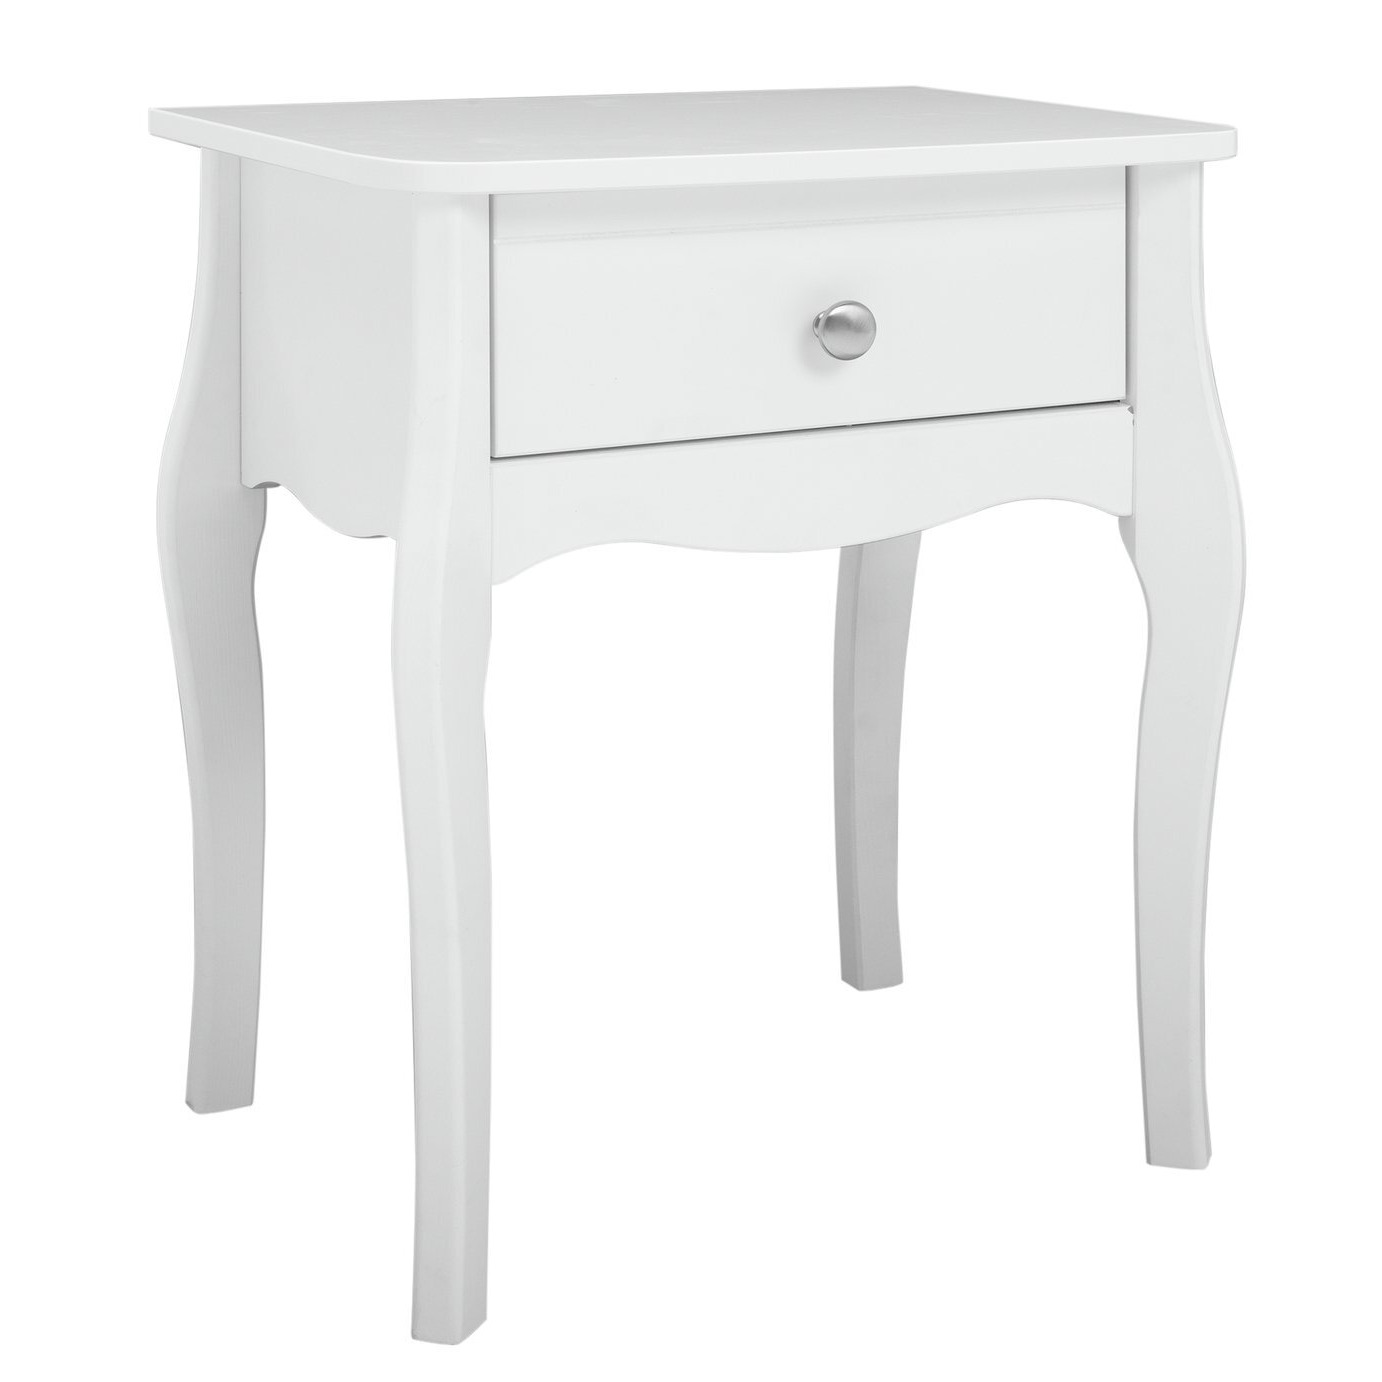 Argos Home Amelie 1 Drawer Bedside Table - White - image 1